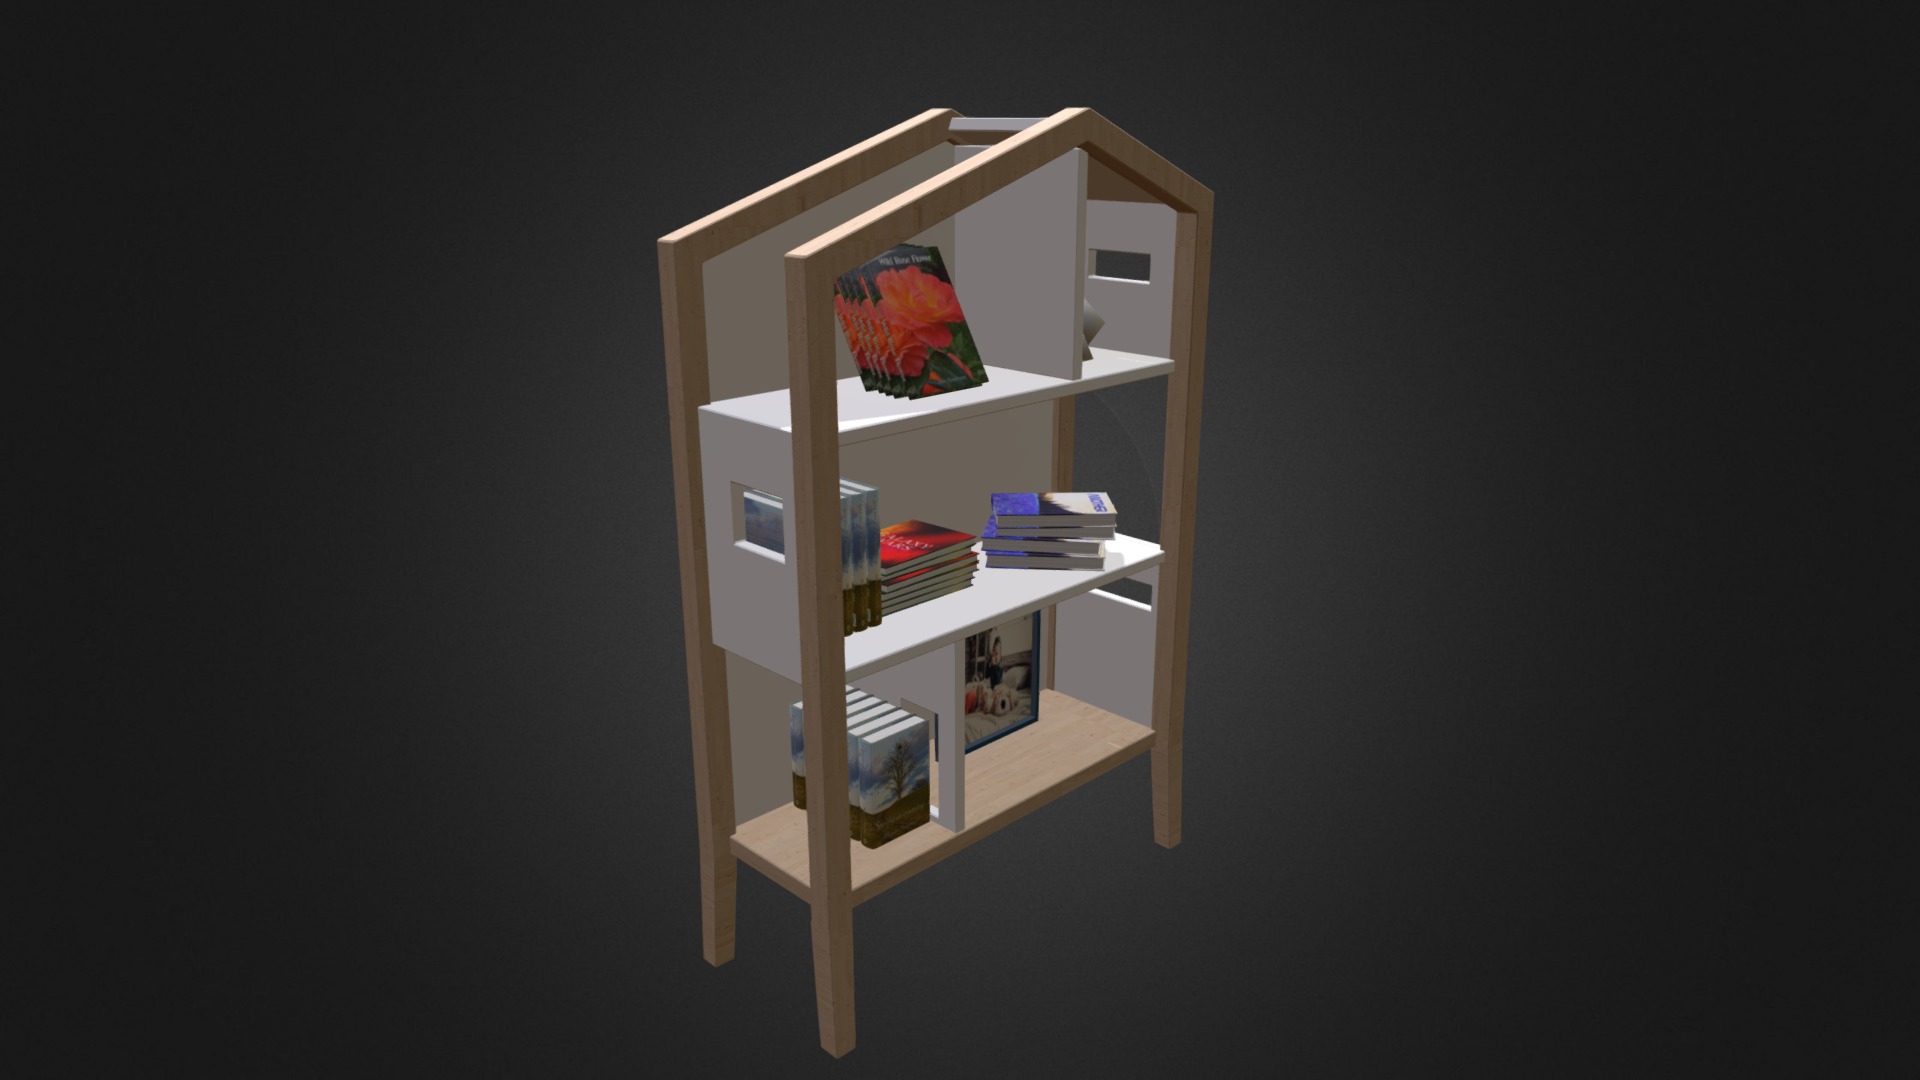 3D model House Shape Shelf - This is a 3D model of the House Shape Shelf. The 3D model is about a wooden shelf with books and a toy on it.